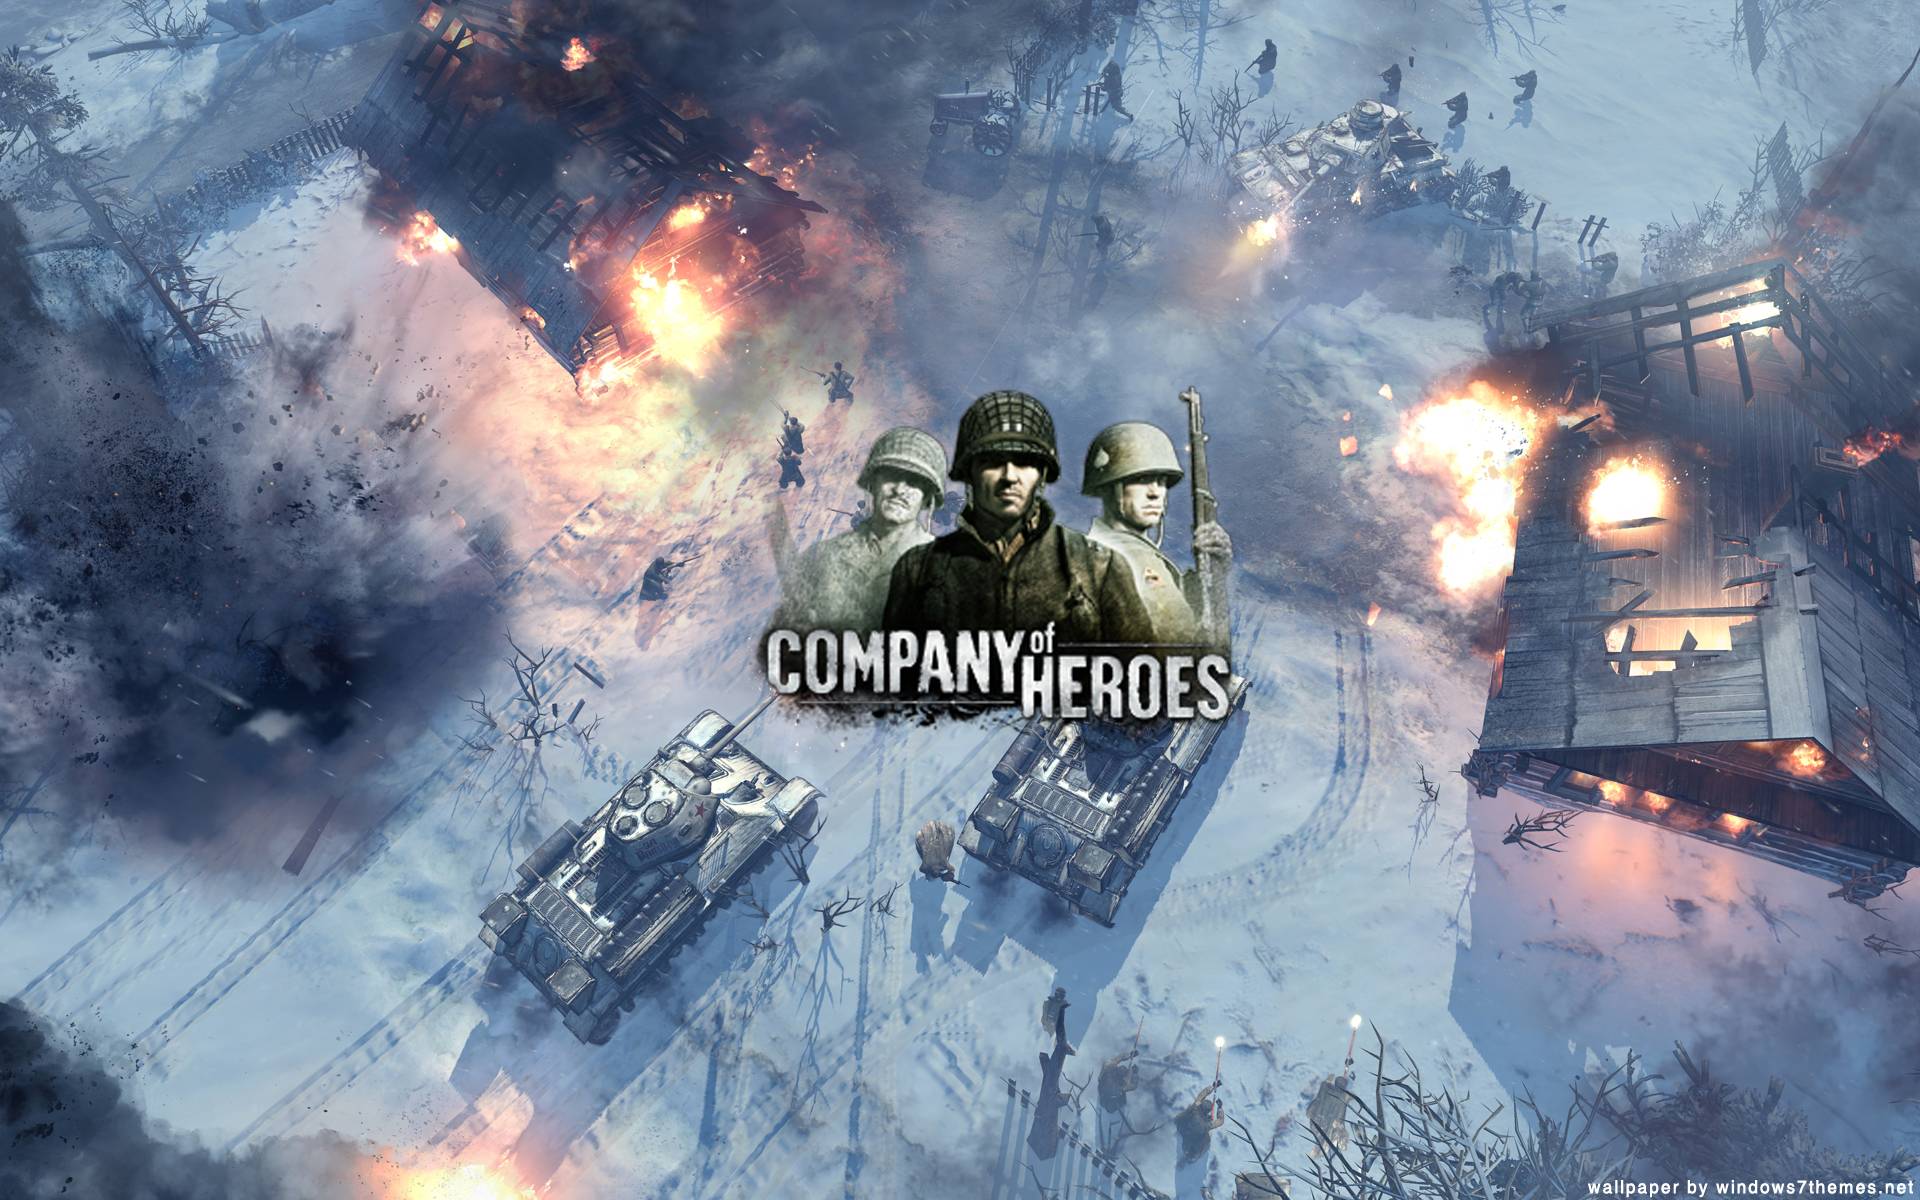 company of heroes wallpaper,action adventure game,strategy video game,pc game,games,cg artwork